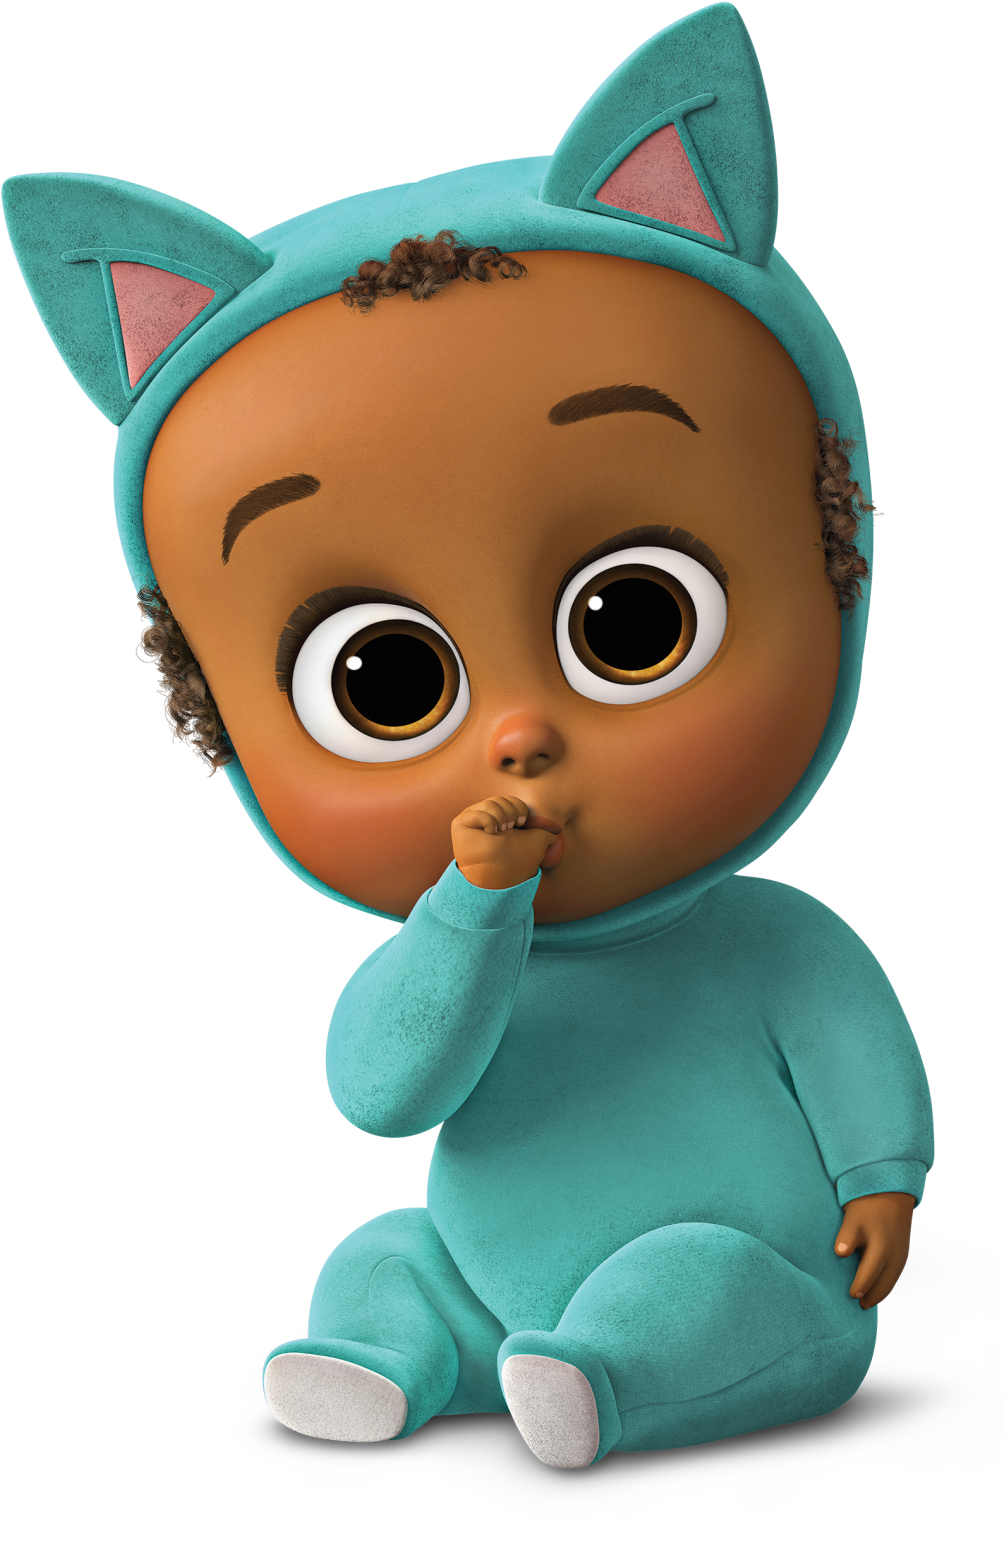 A Cartoon Baby With A Blue Bodysuit And Ears